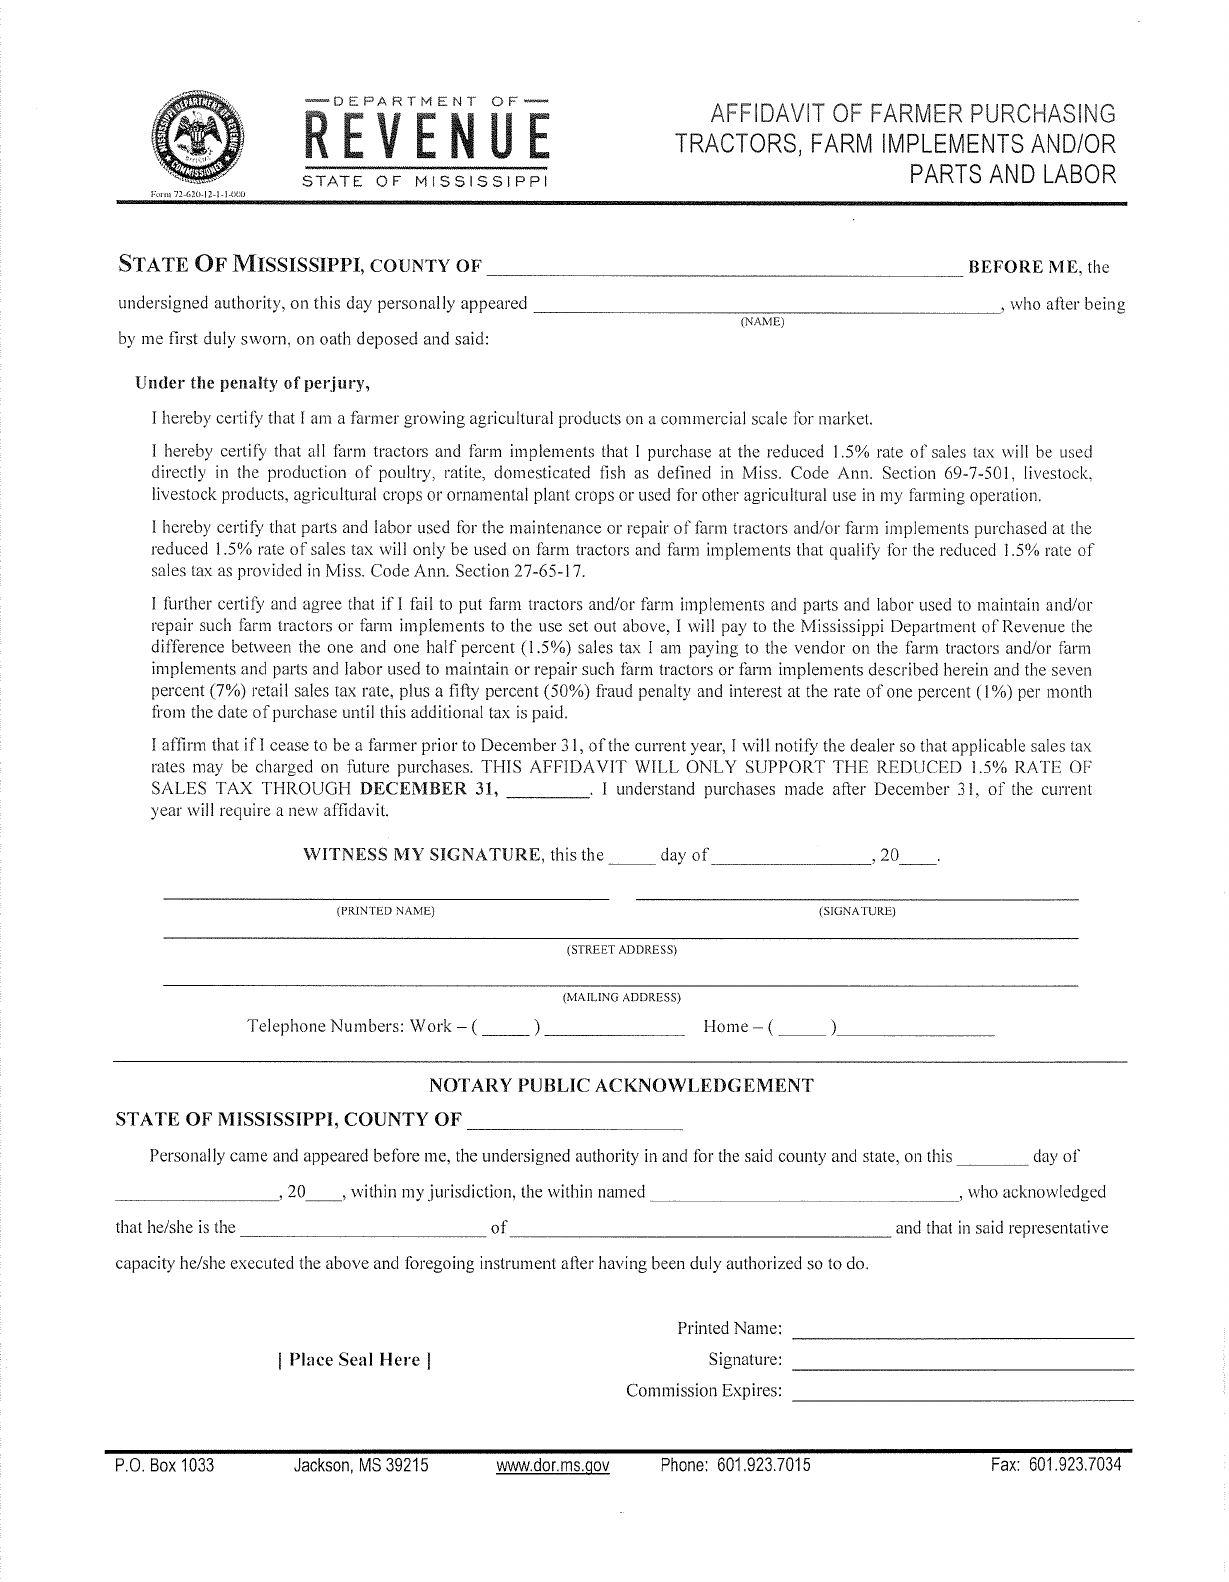 Mississippi Affidavit of Farmer Purchasing Tractors, Farm Implements and/or Parts and Labor Form